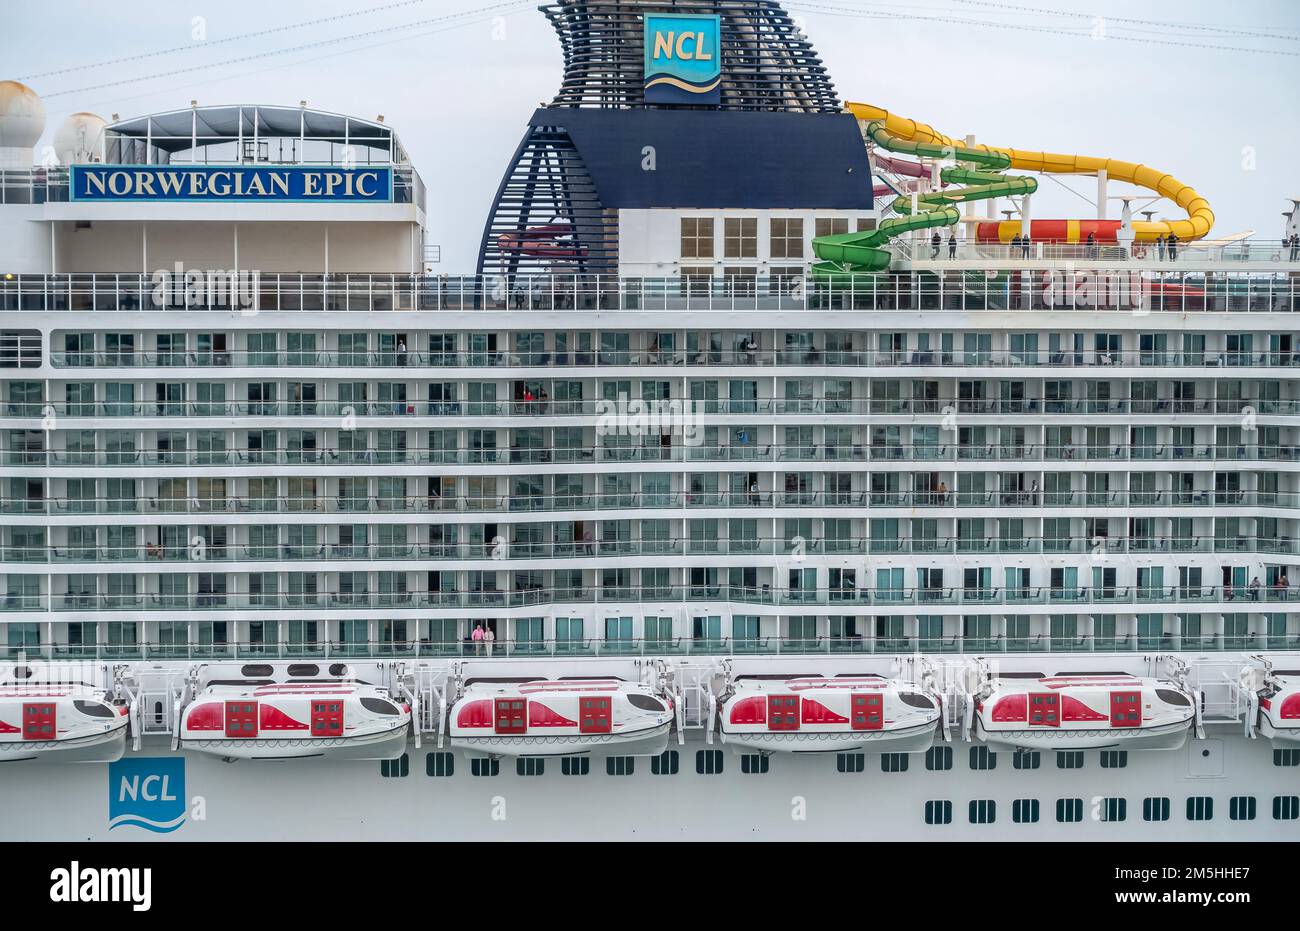 Cruise ship Norwegian Epic in the port of Civitavecchia, Italy on May 04, 2022. Stock Photo